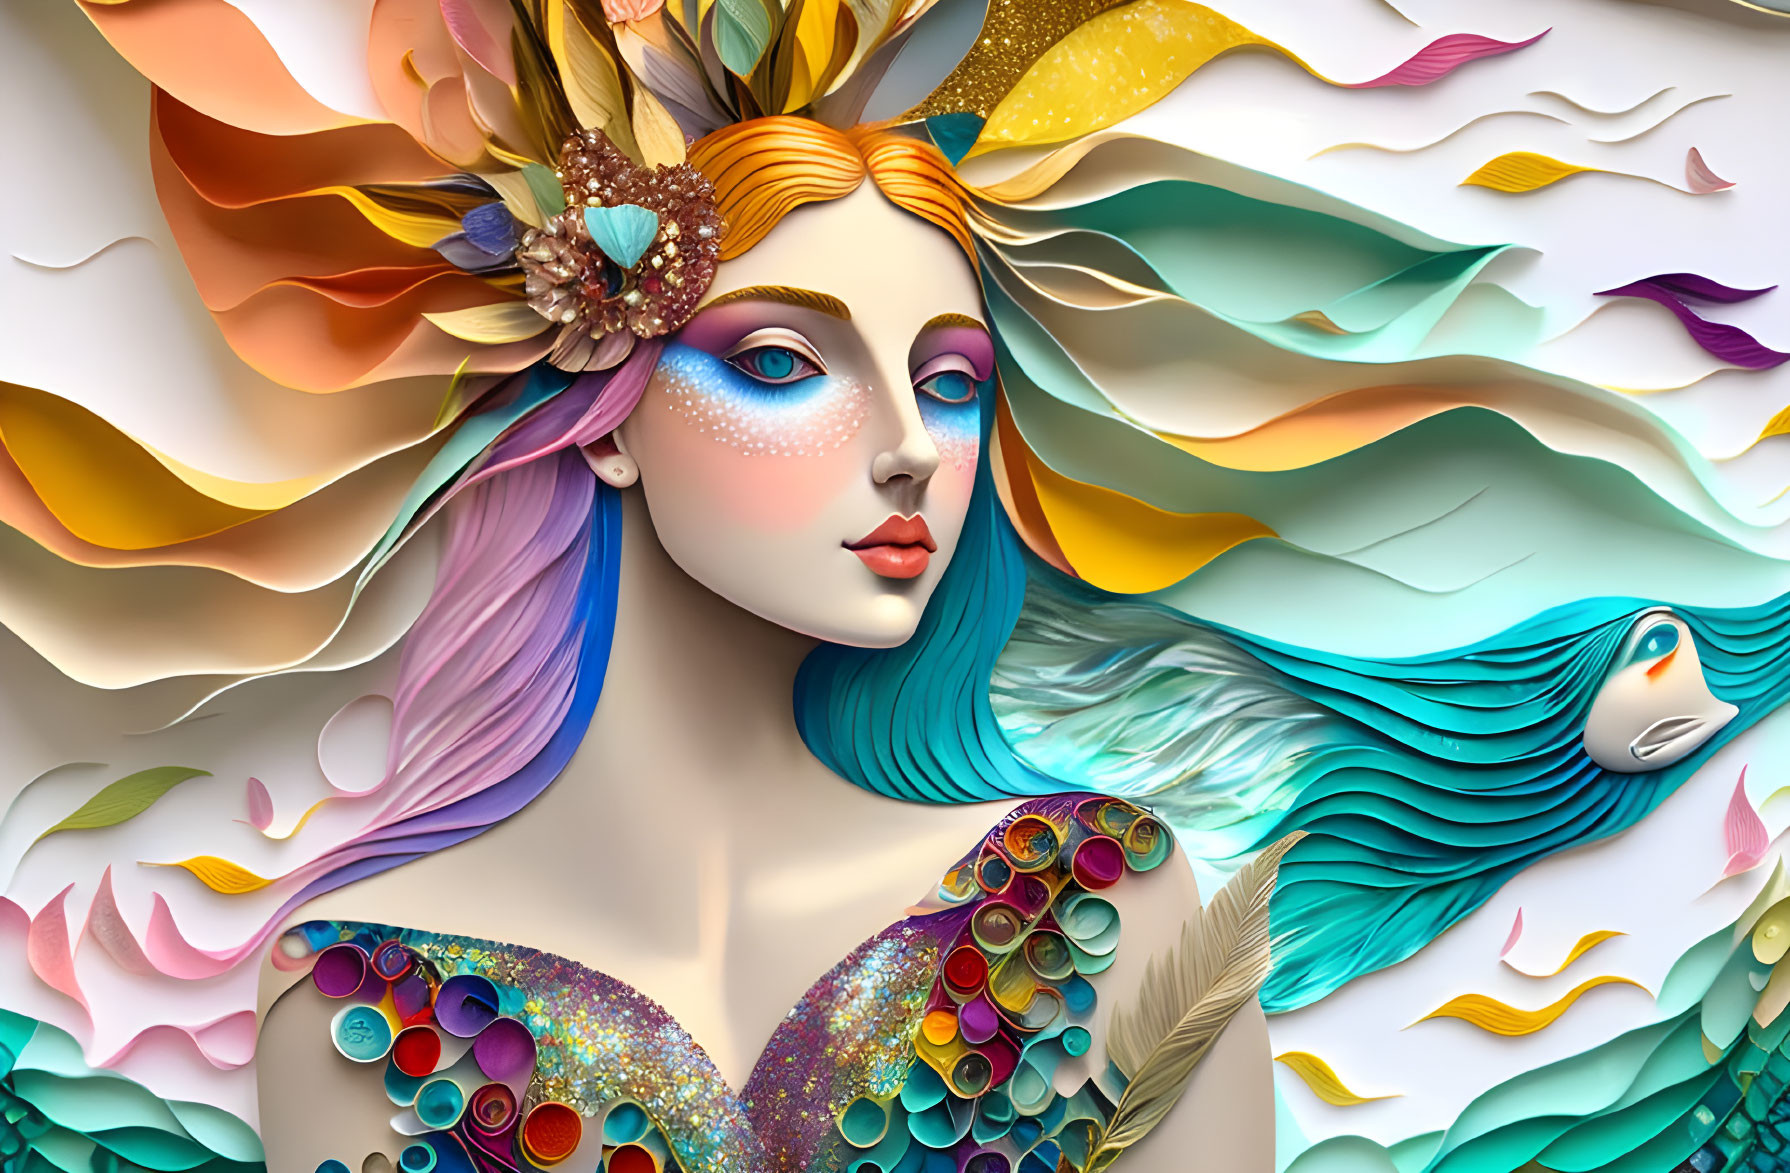 Colorful digital artwork of a woman with multicolored hair and floral adornments